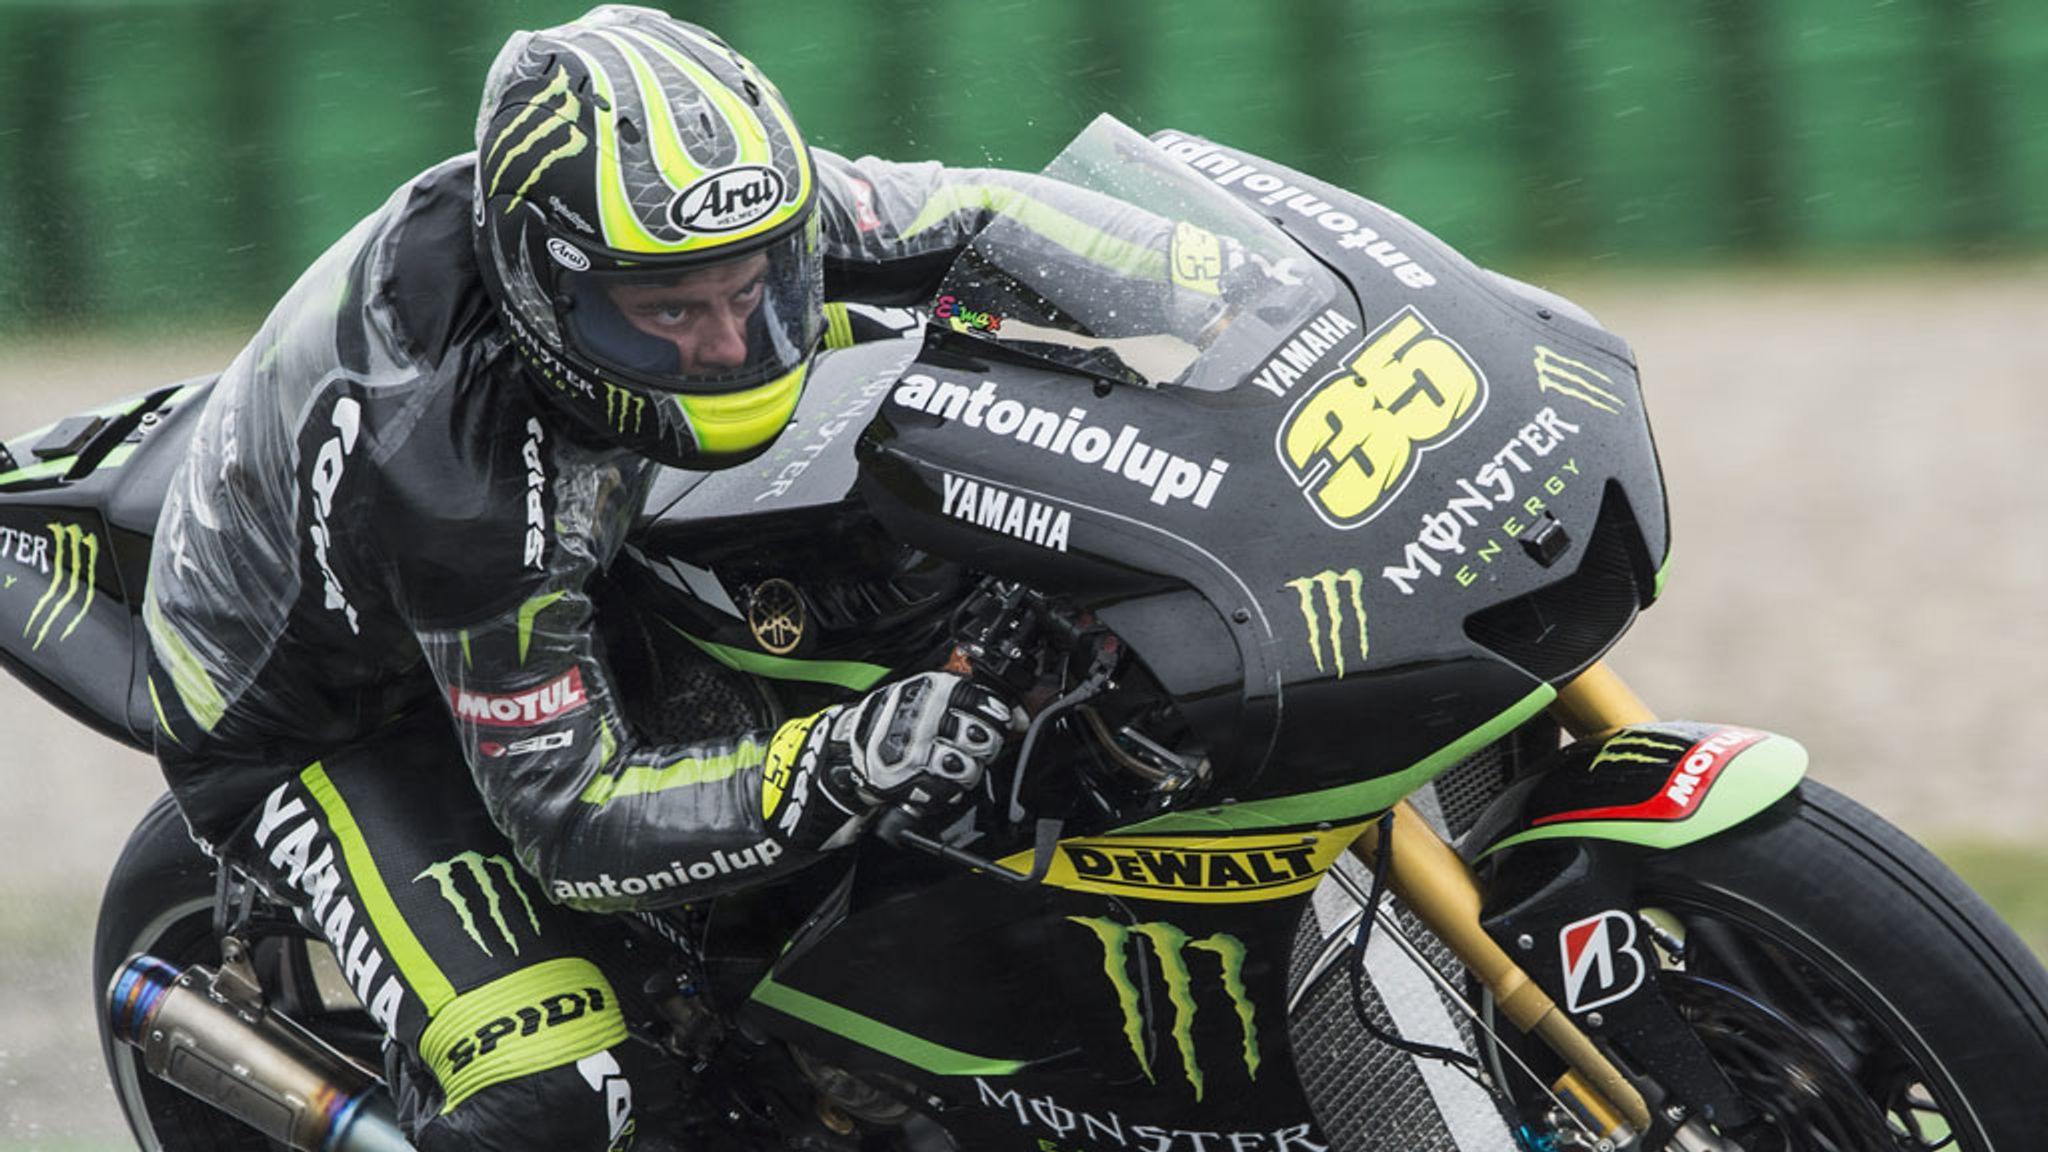 MotoGP Cal Crutchlow ends long wait for a British pole by qualifying fastest at Assen Motor Racing News Sky Sports